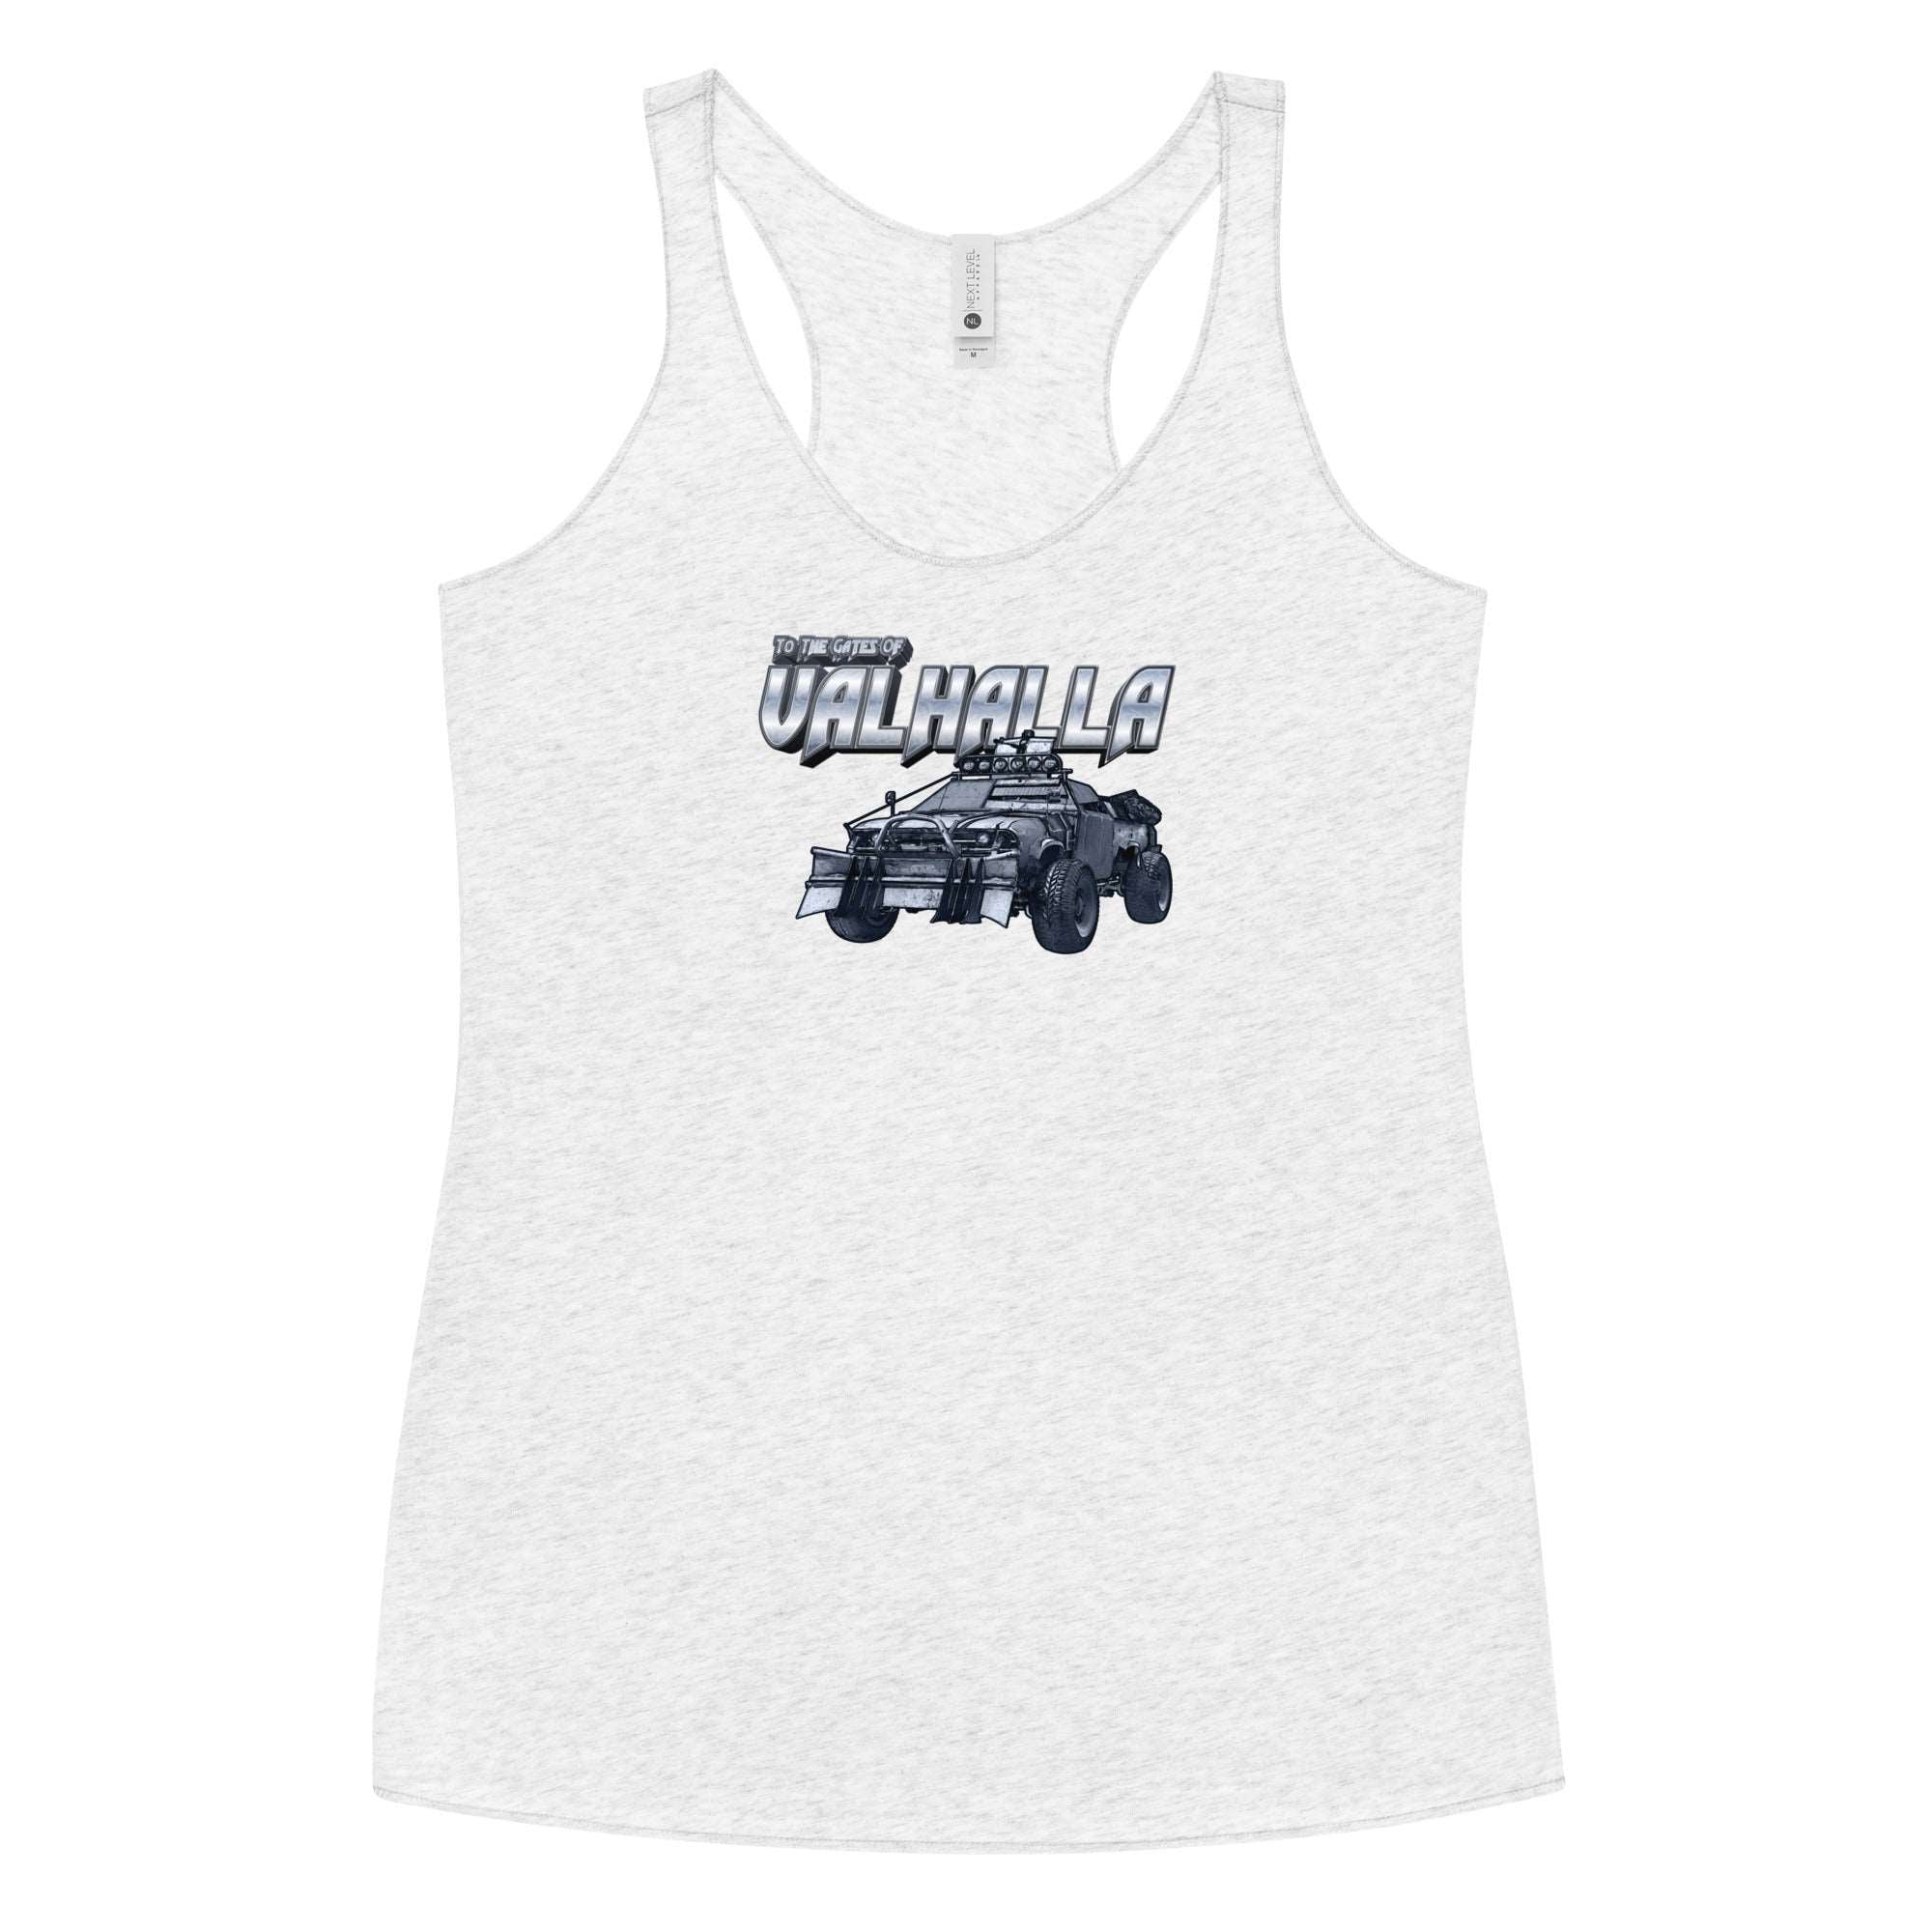 a women's tank top with an image of a truck